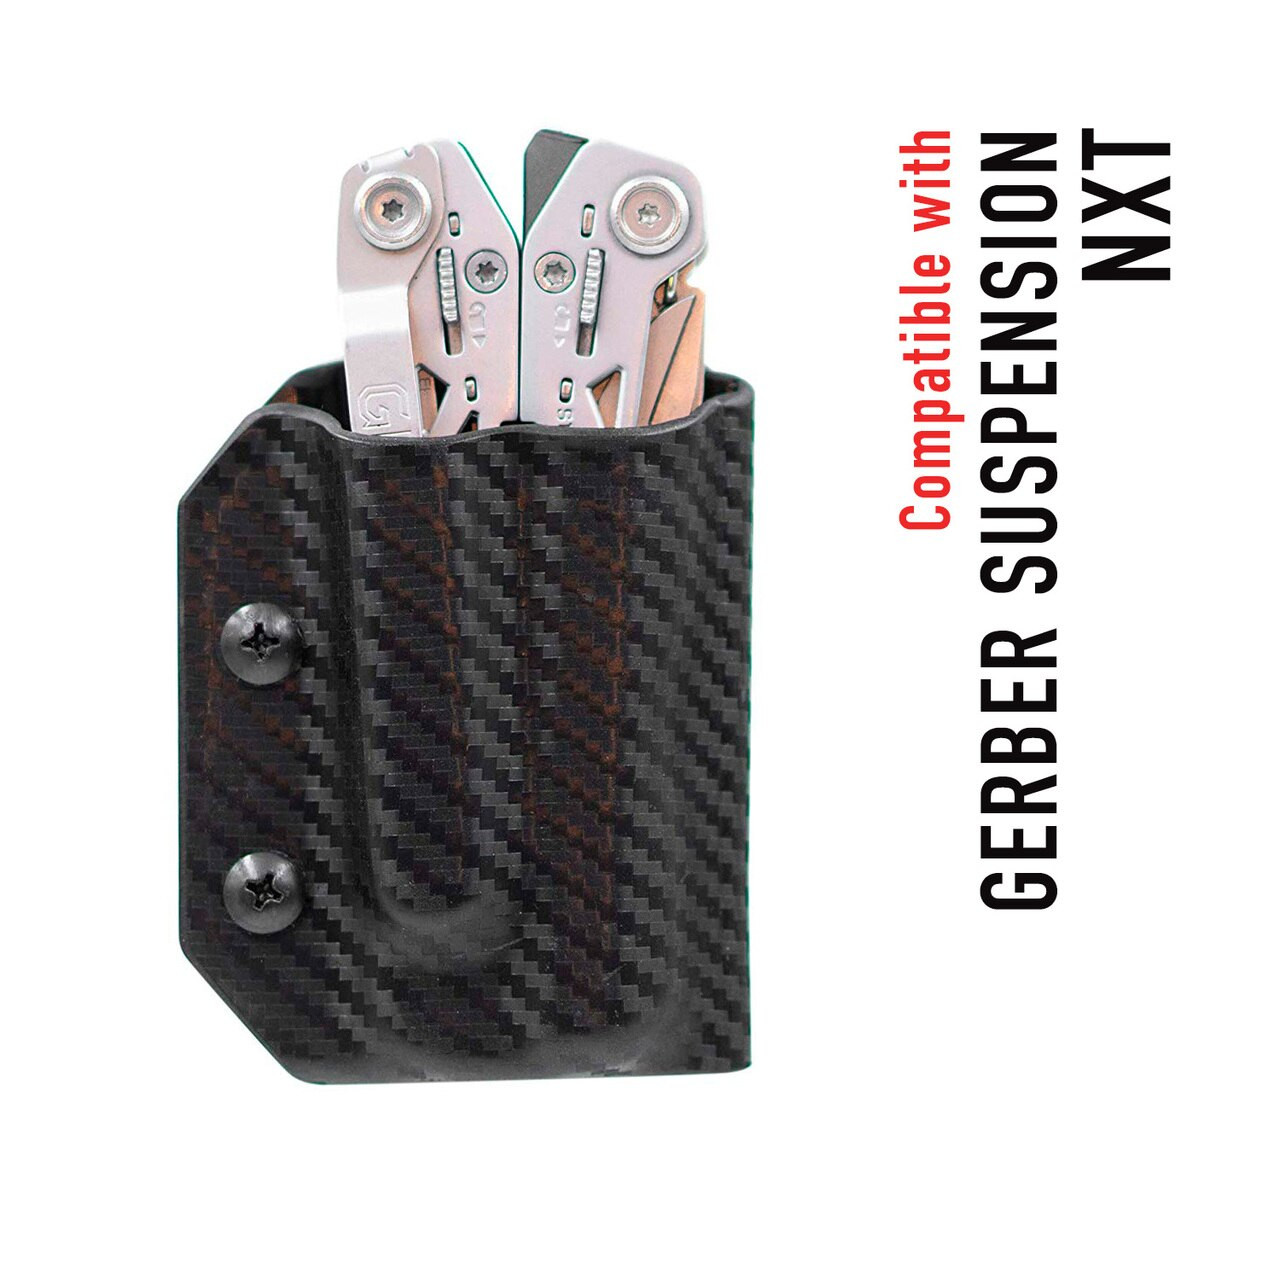 Clip　Sheath　Carry　Gerber　in　USA)　Kydex　for　the　NXT　Suspension　(Made　Fstop　Lights